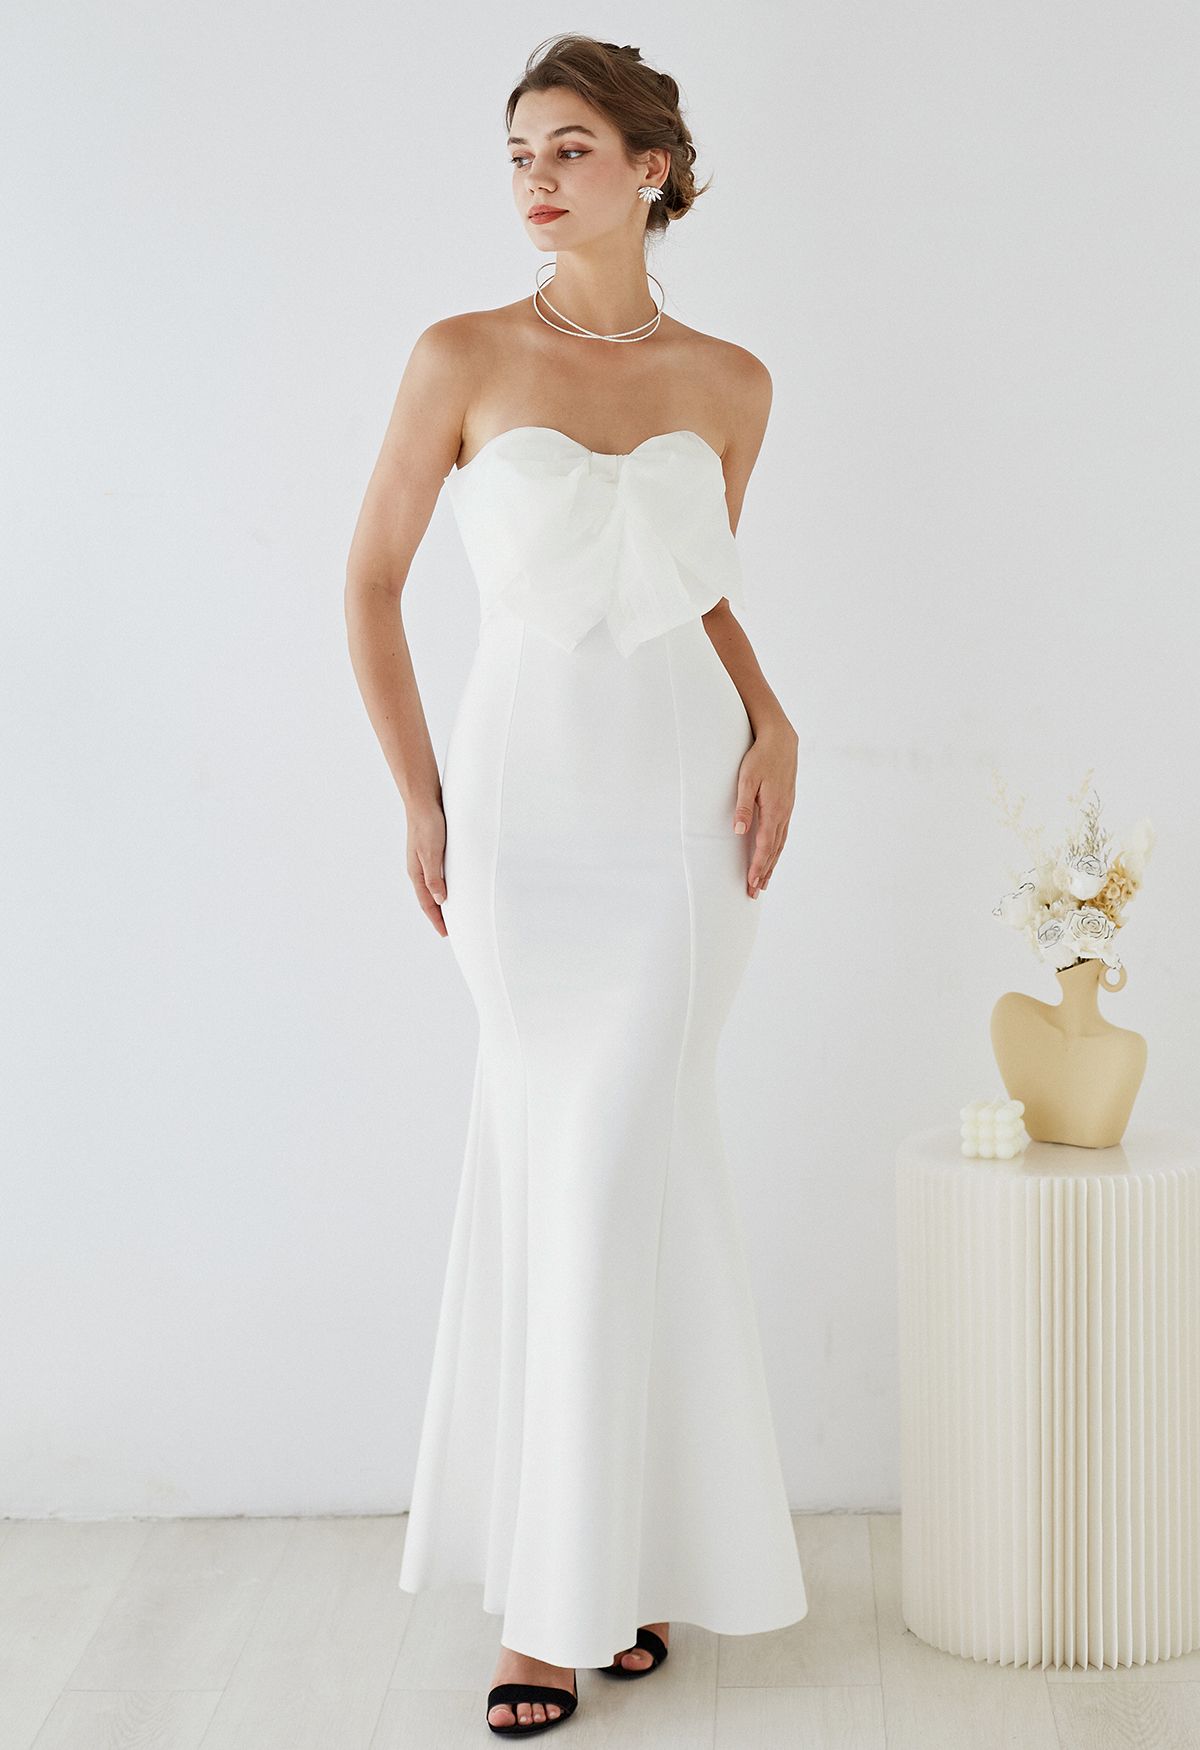 Bowknot Strapless Mermaid Gown in White